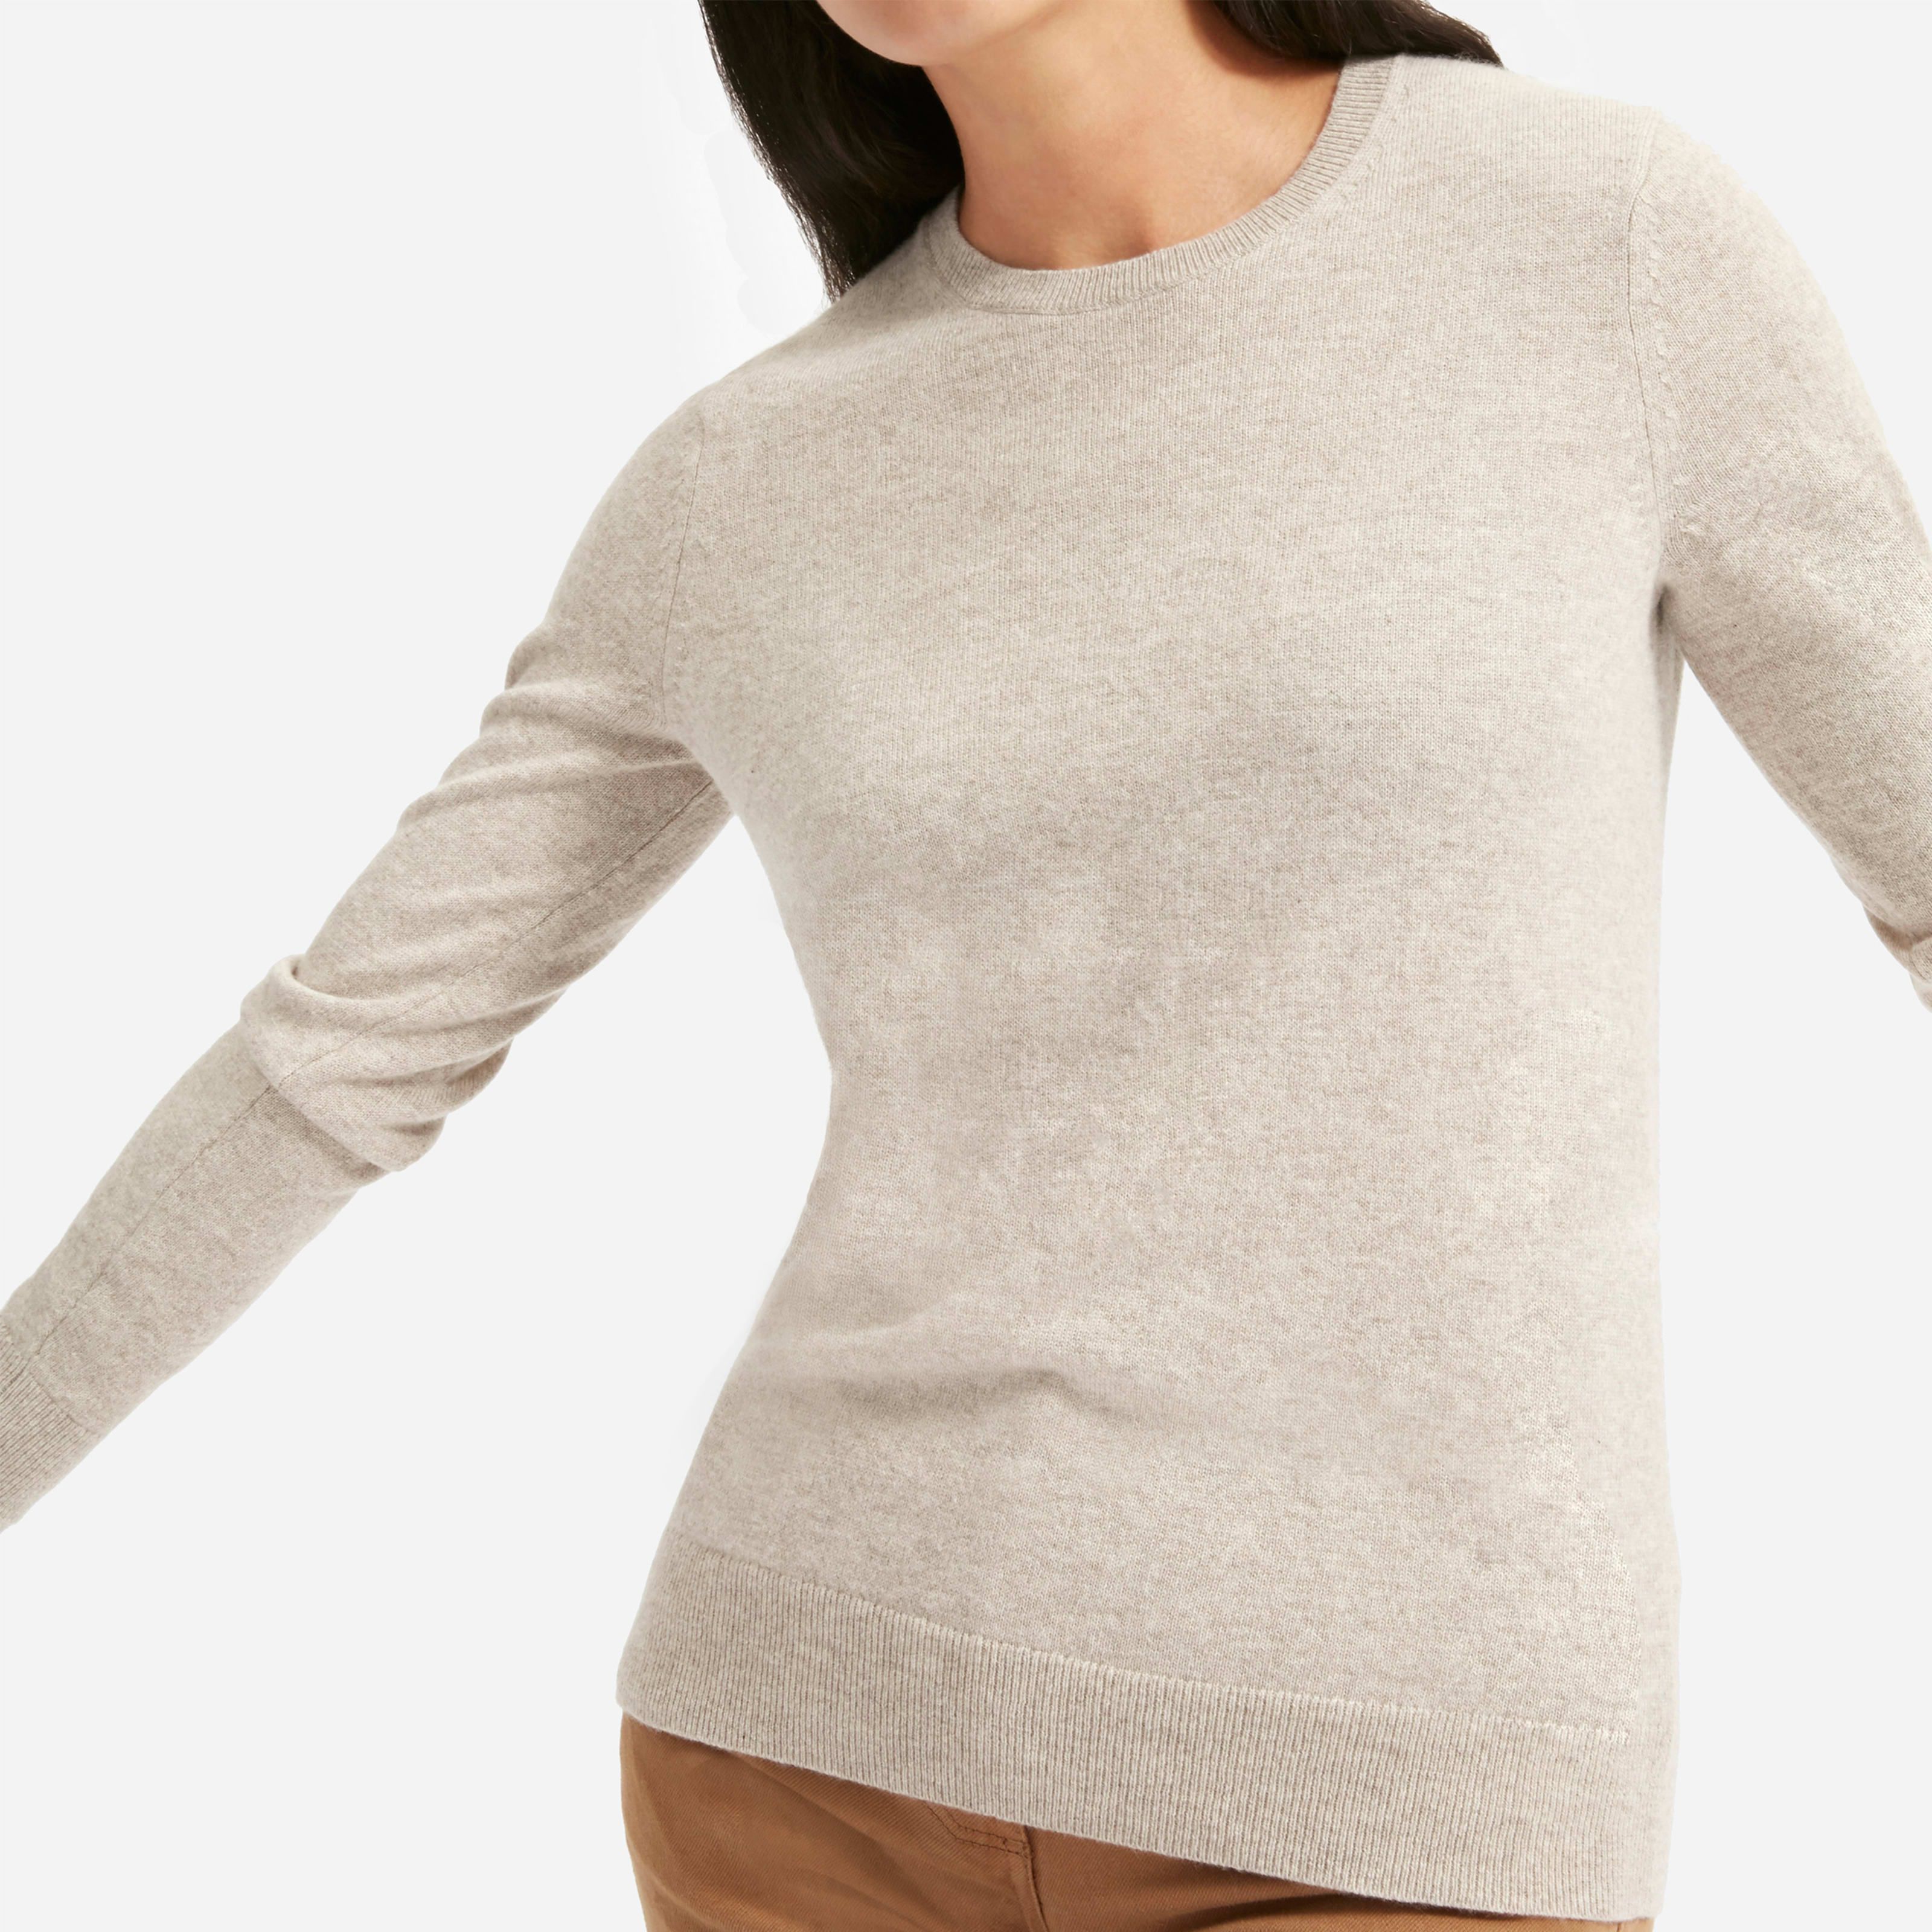 Women's Cashmere Crew Sweater by Everlane in Light Oatmeal, Size XS | Everlane